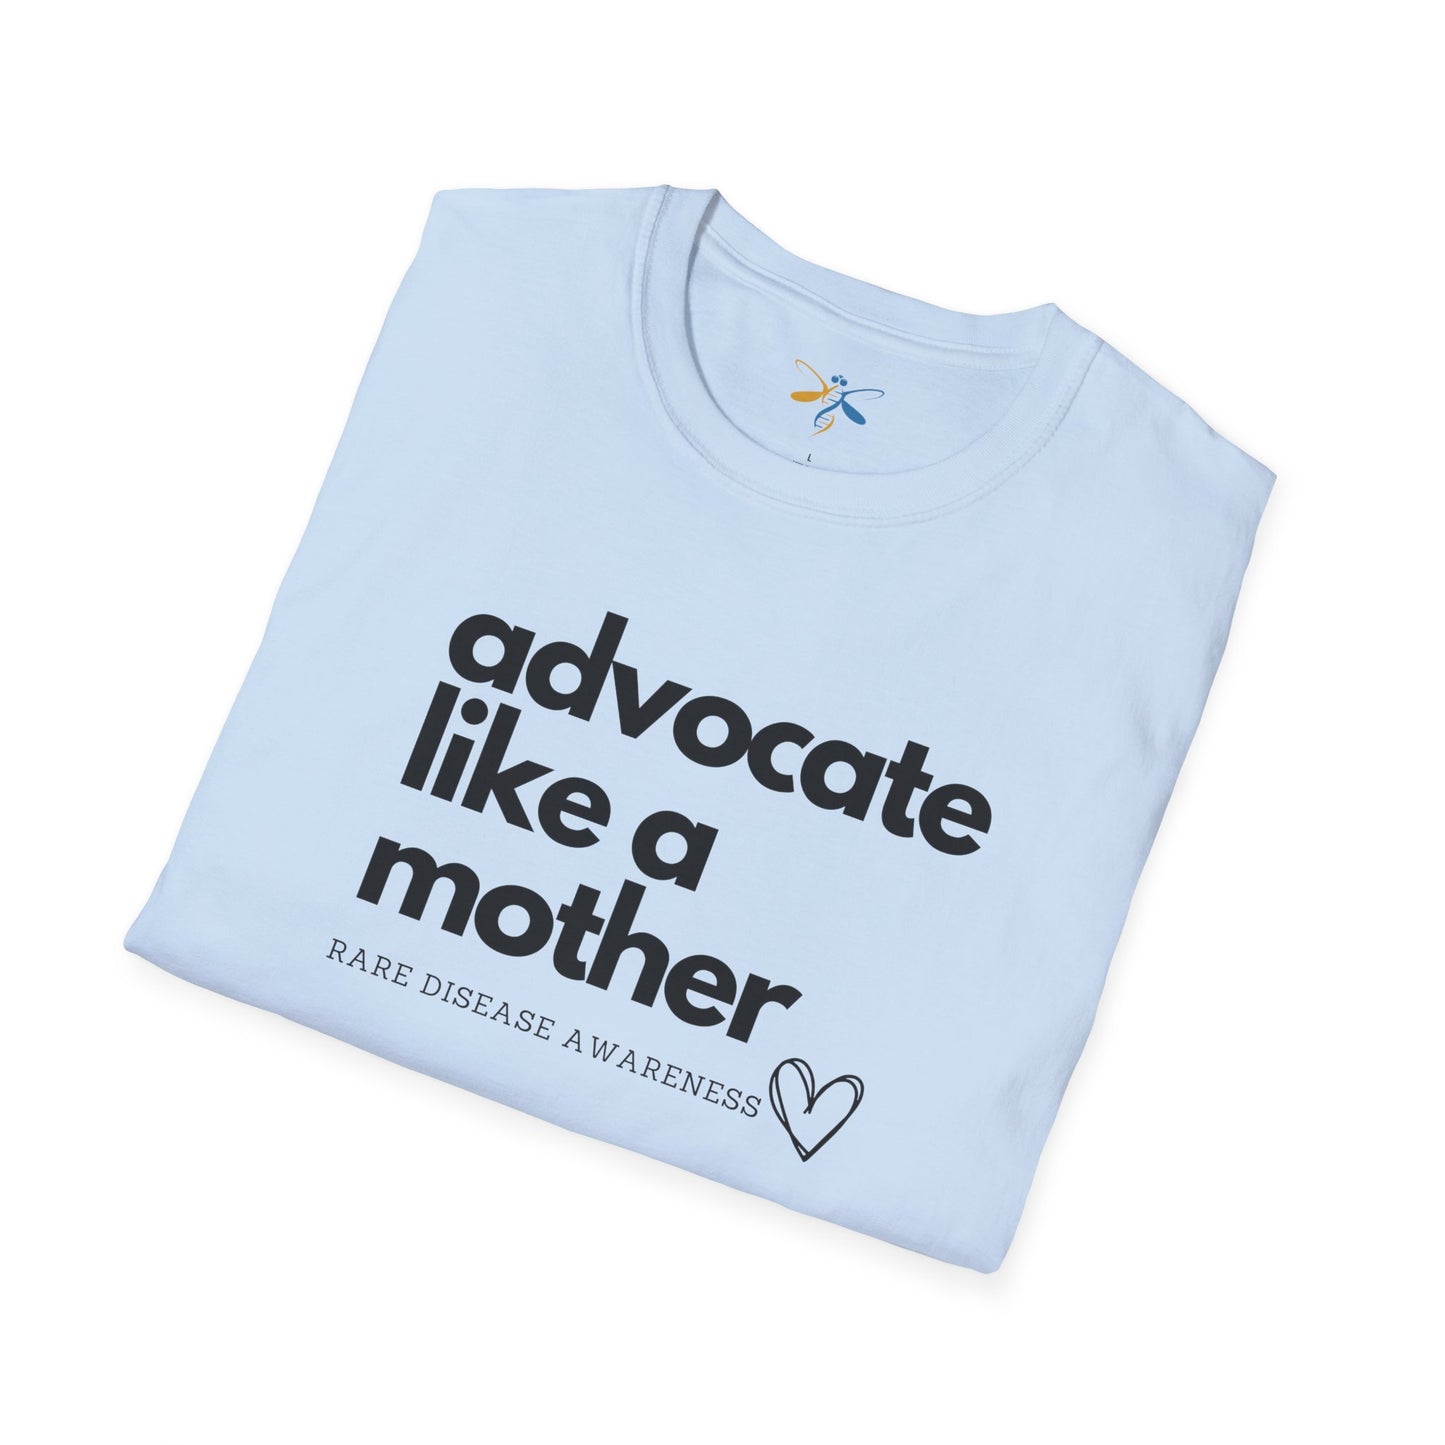 Advocate Like A Mother, Unisex Softstyle T-Shirt